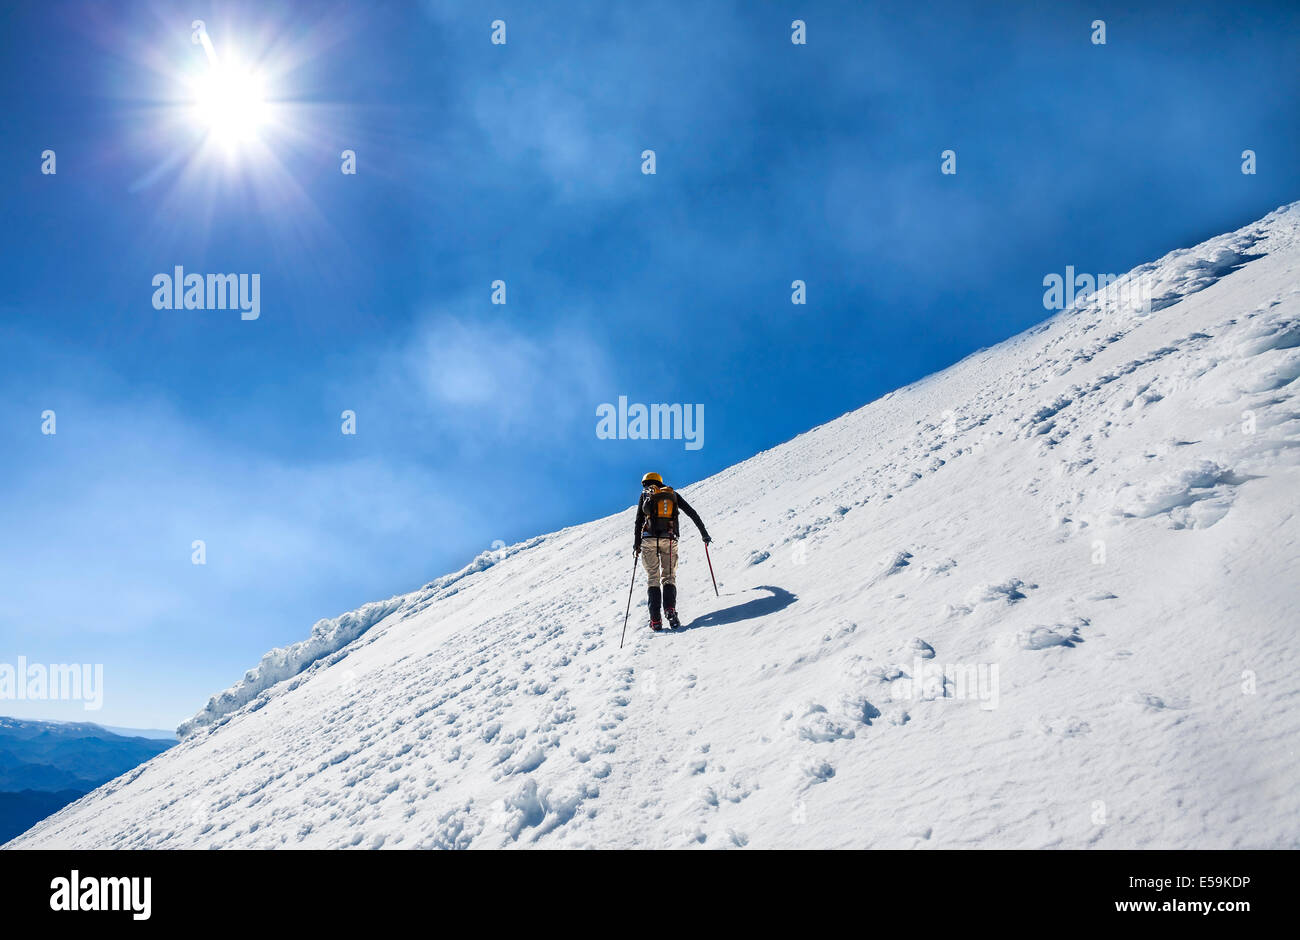 Climber on the way to the top of an active volcano Villarica in Chile. Stock Photo